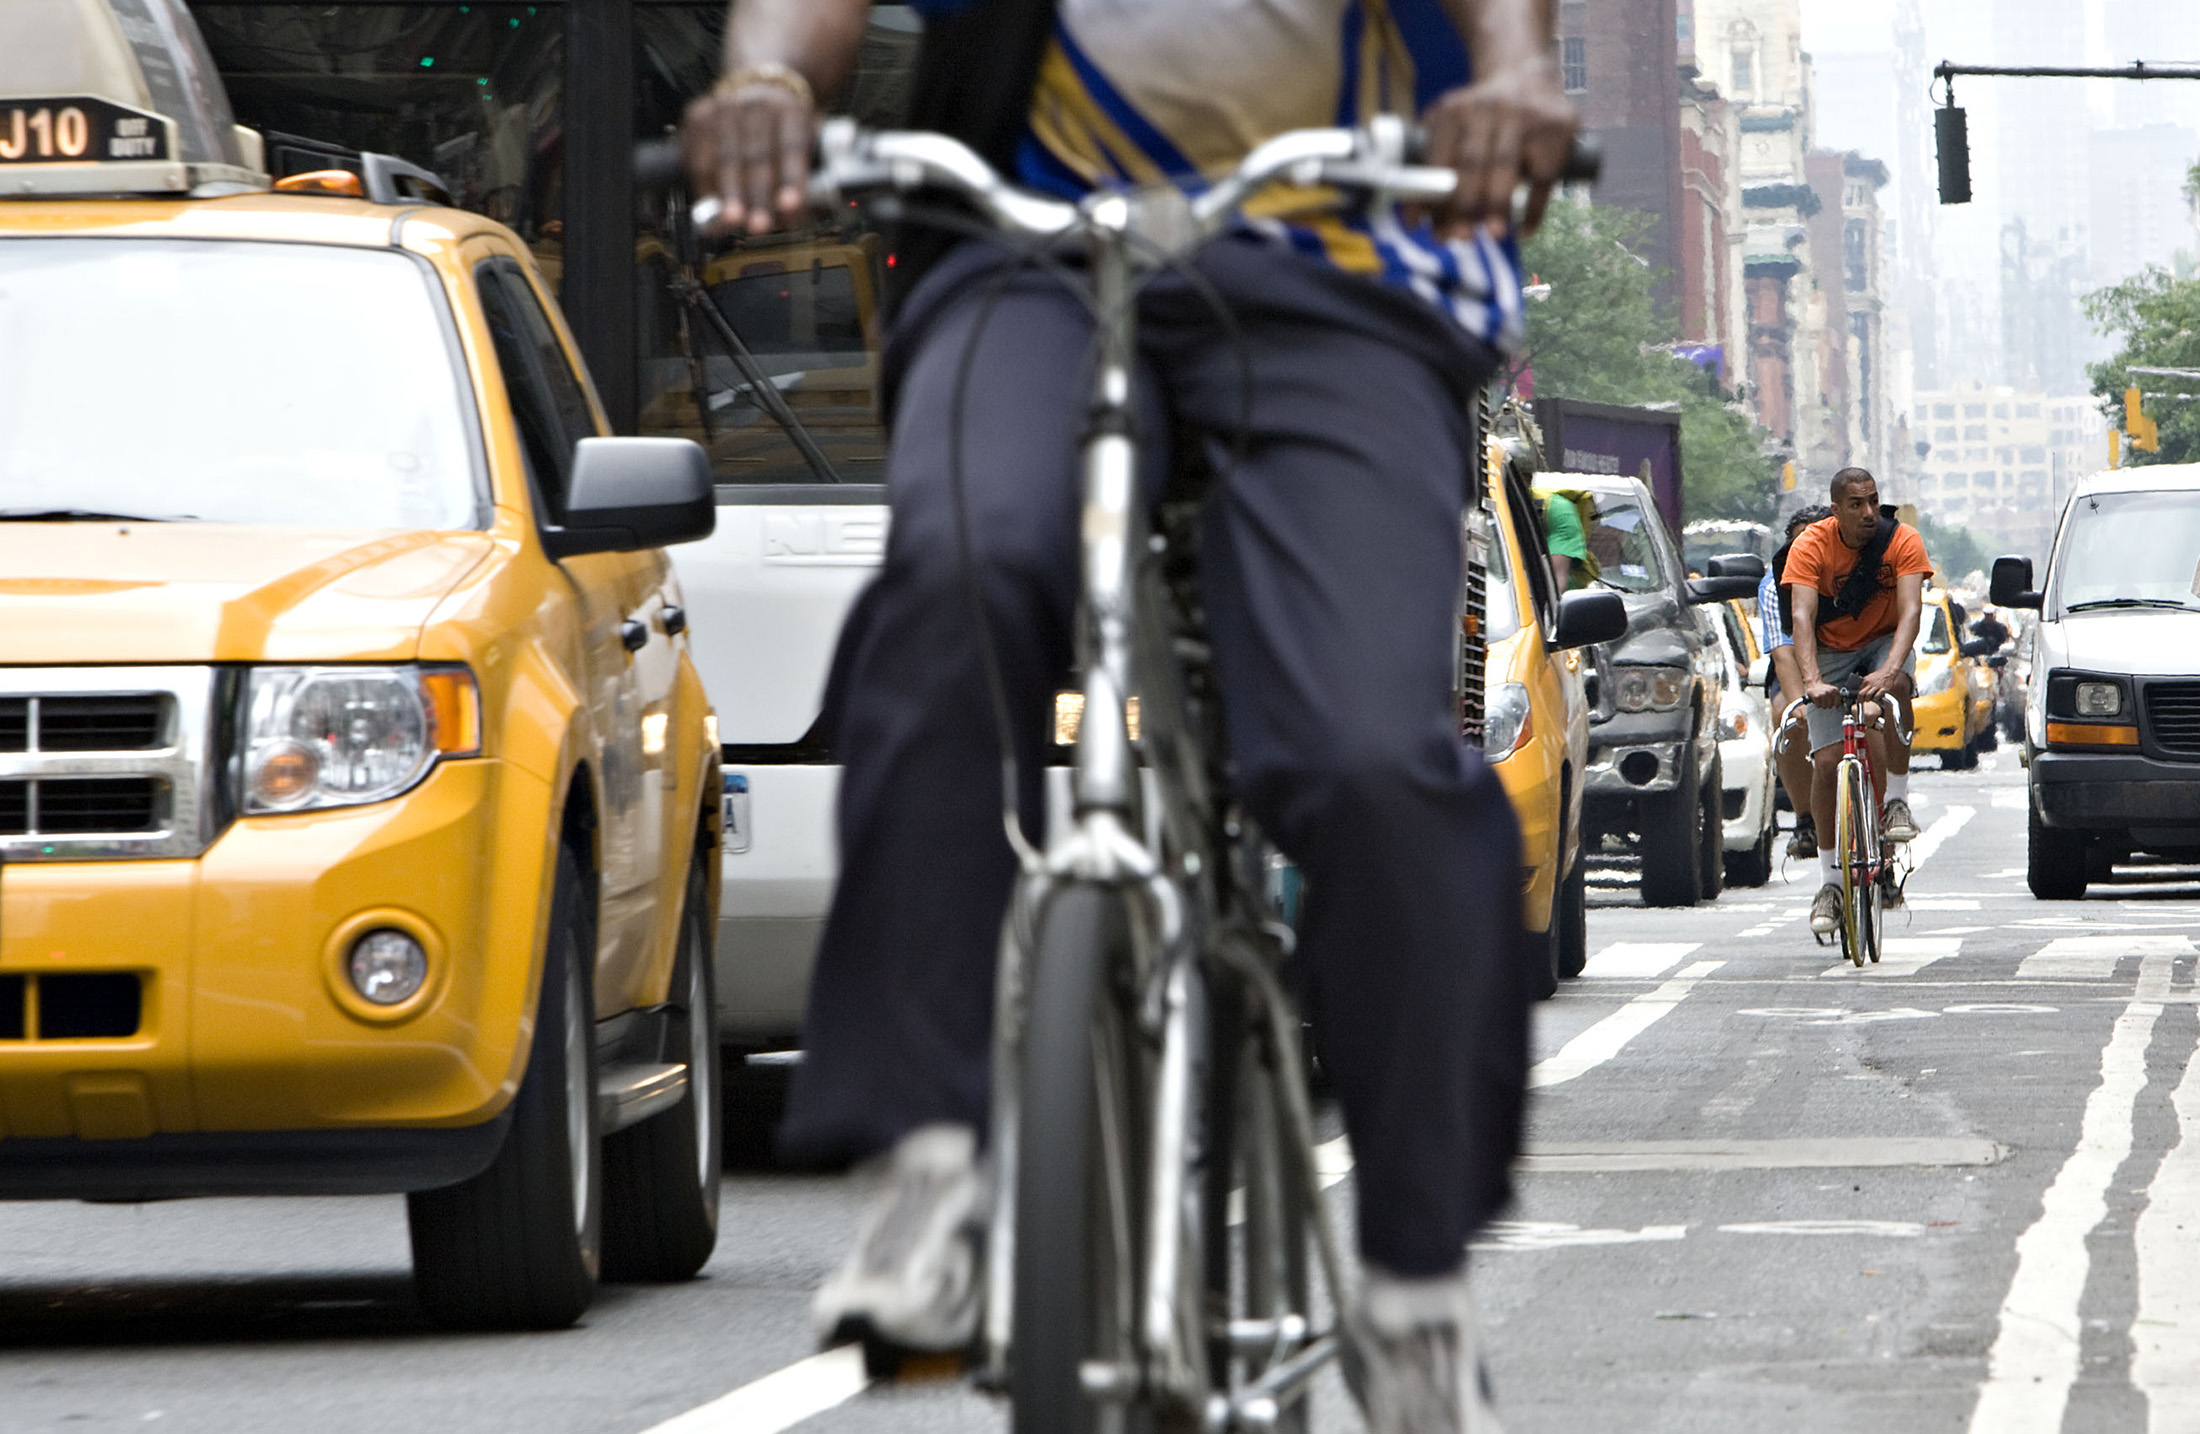 Bicyclists ride in New York.
